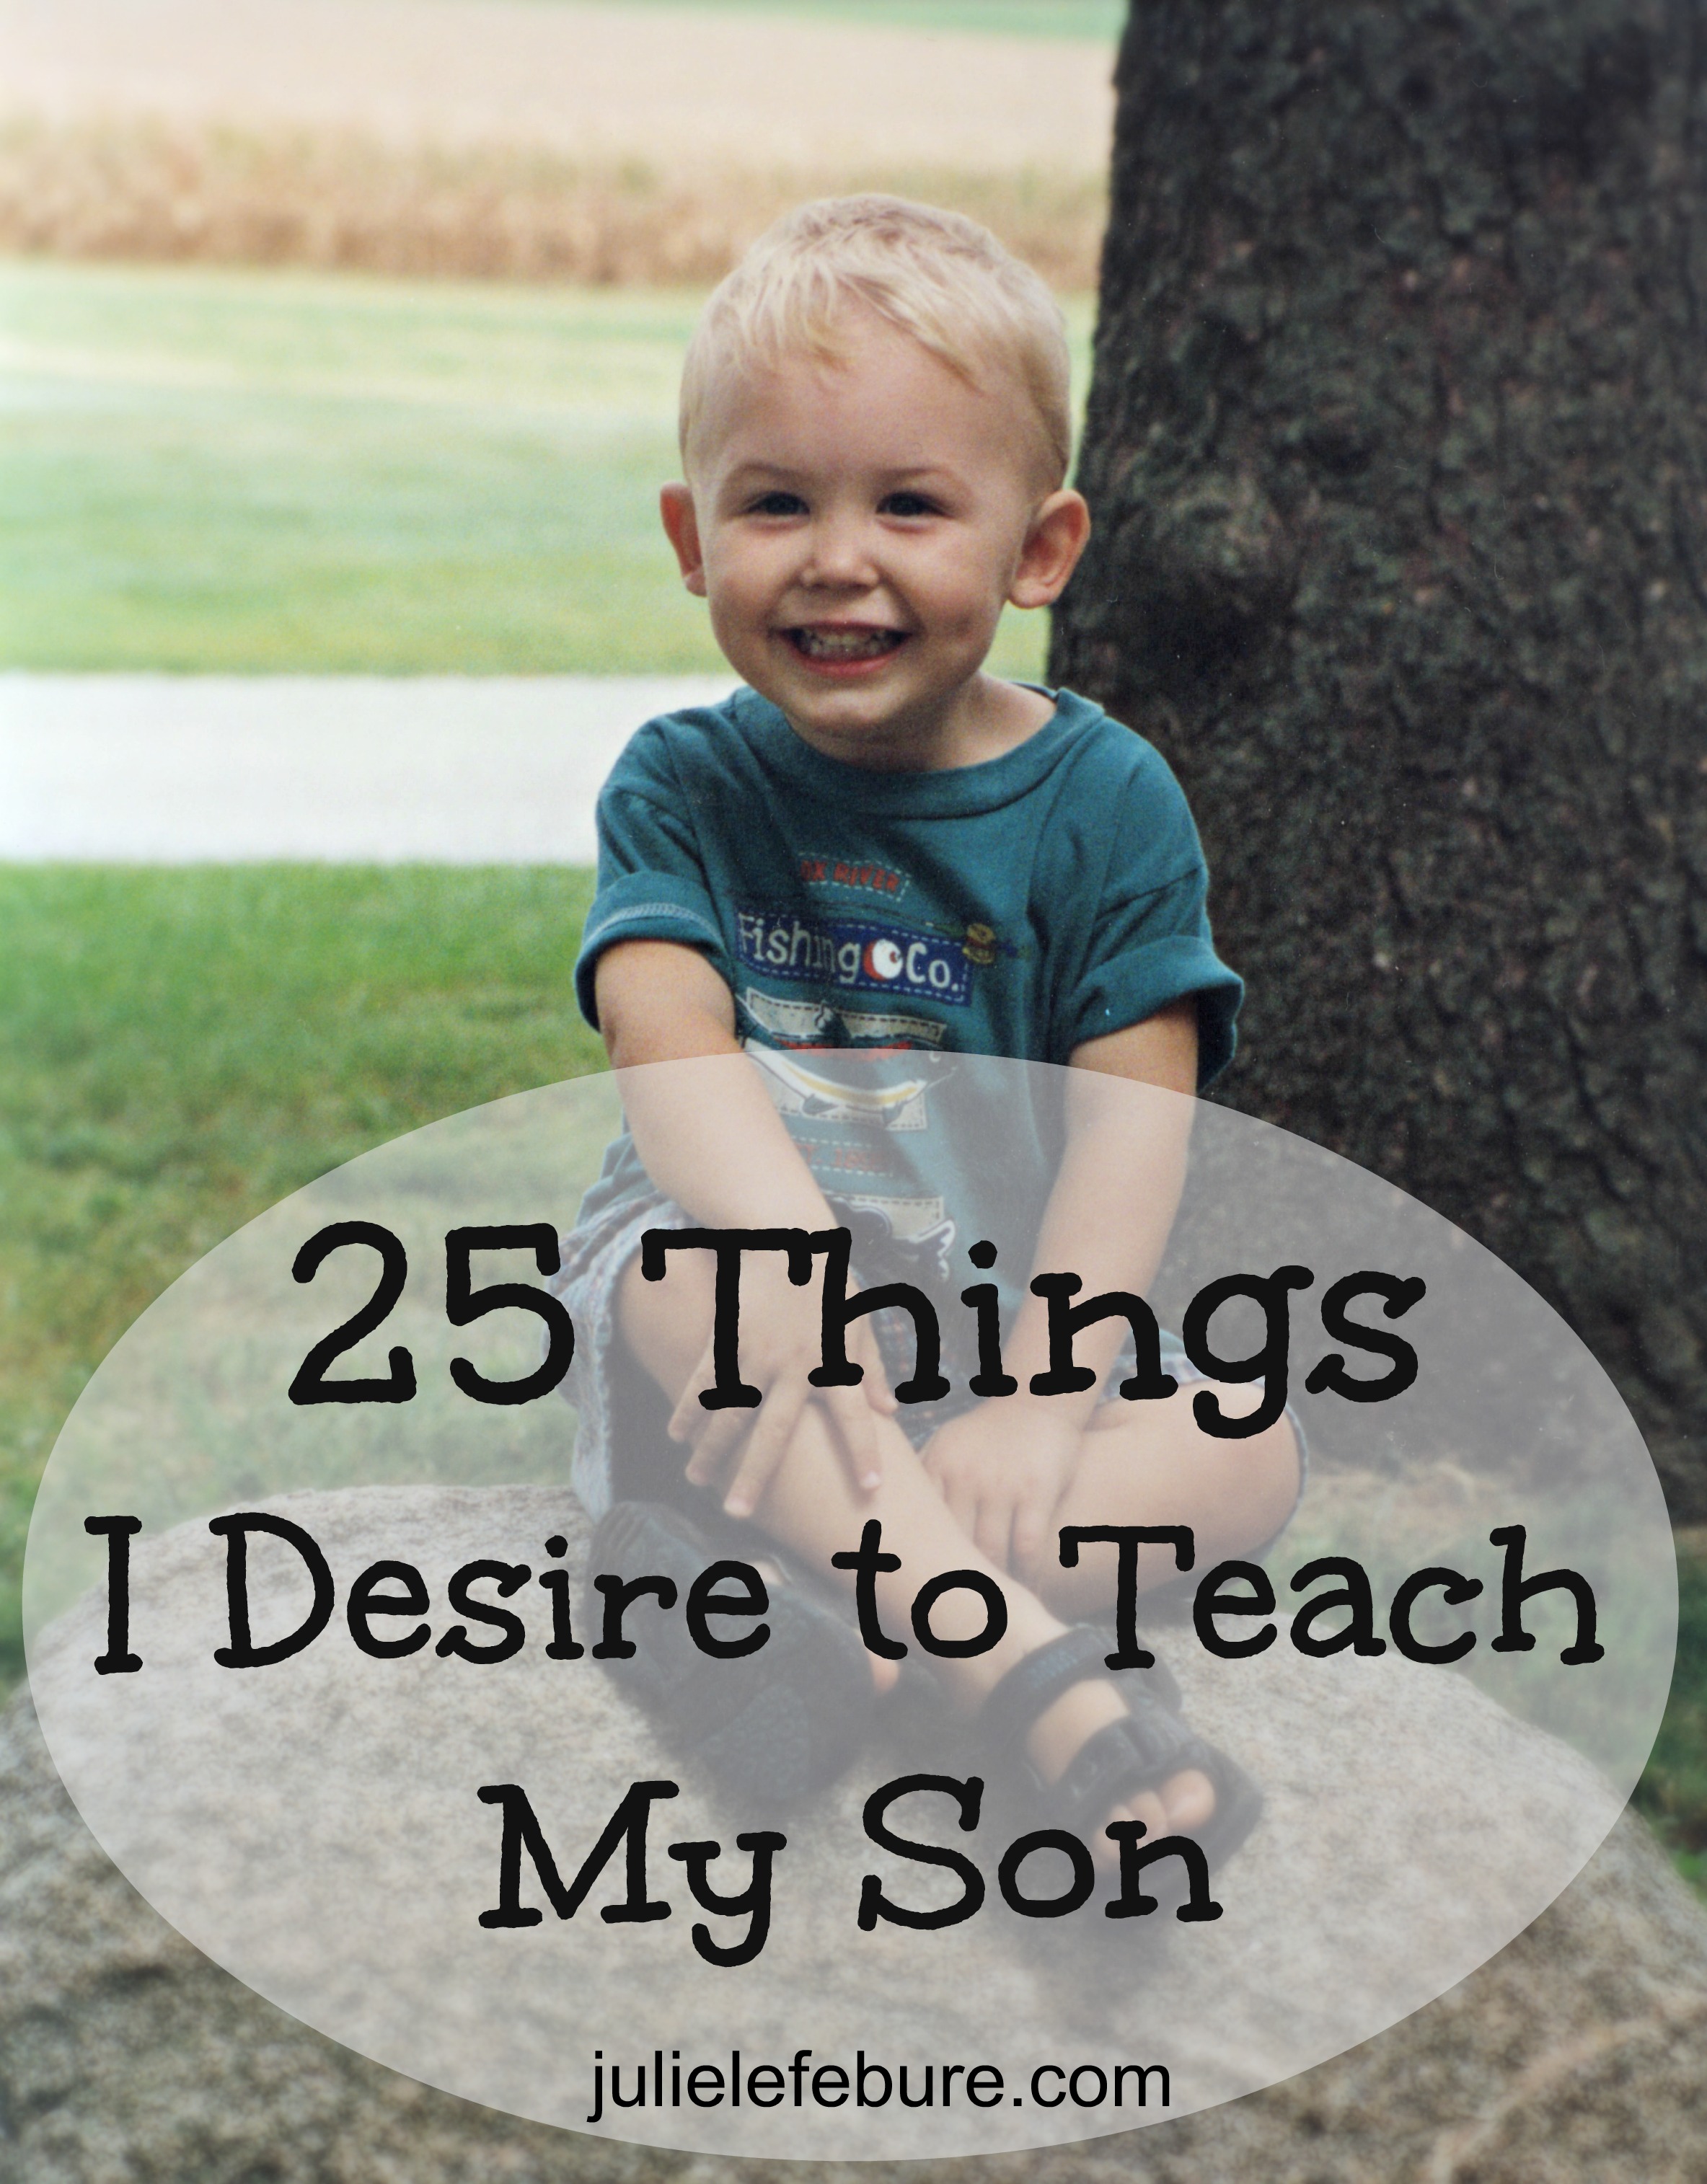 25 Things I Desire to Teach My Son